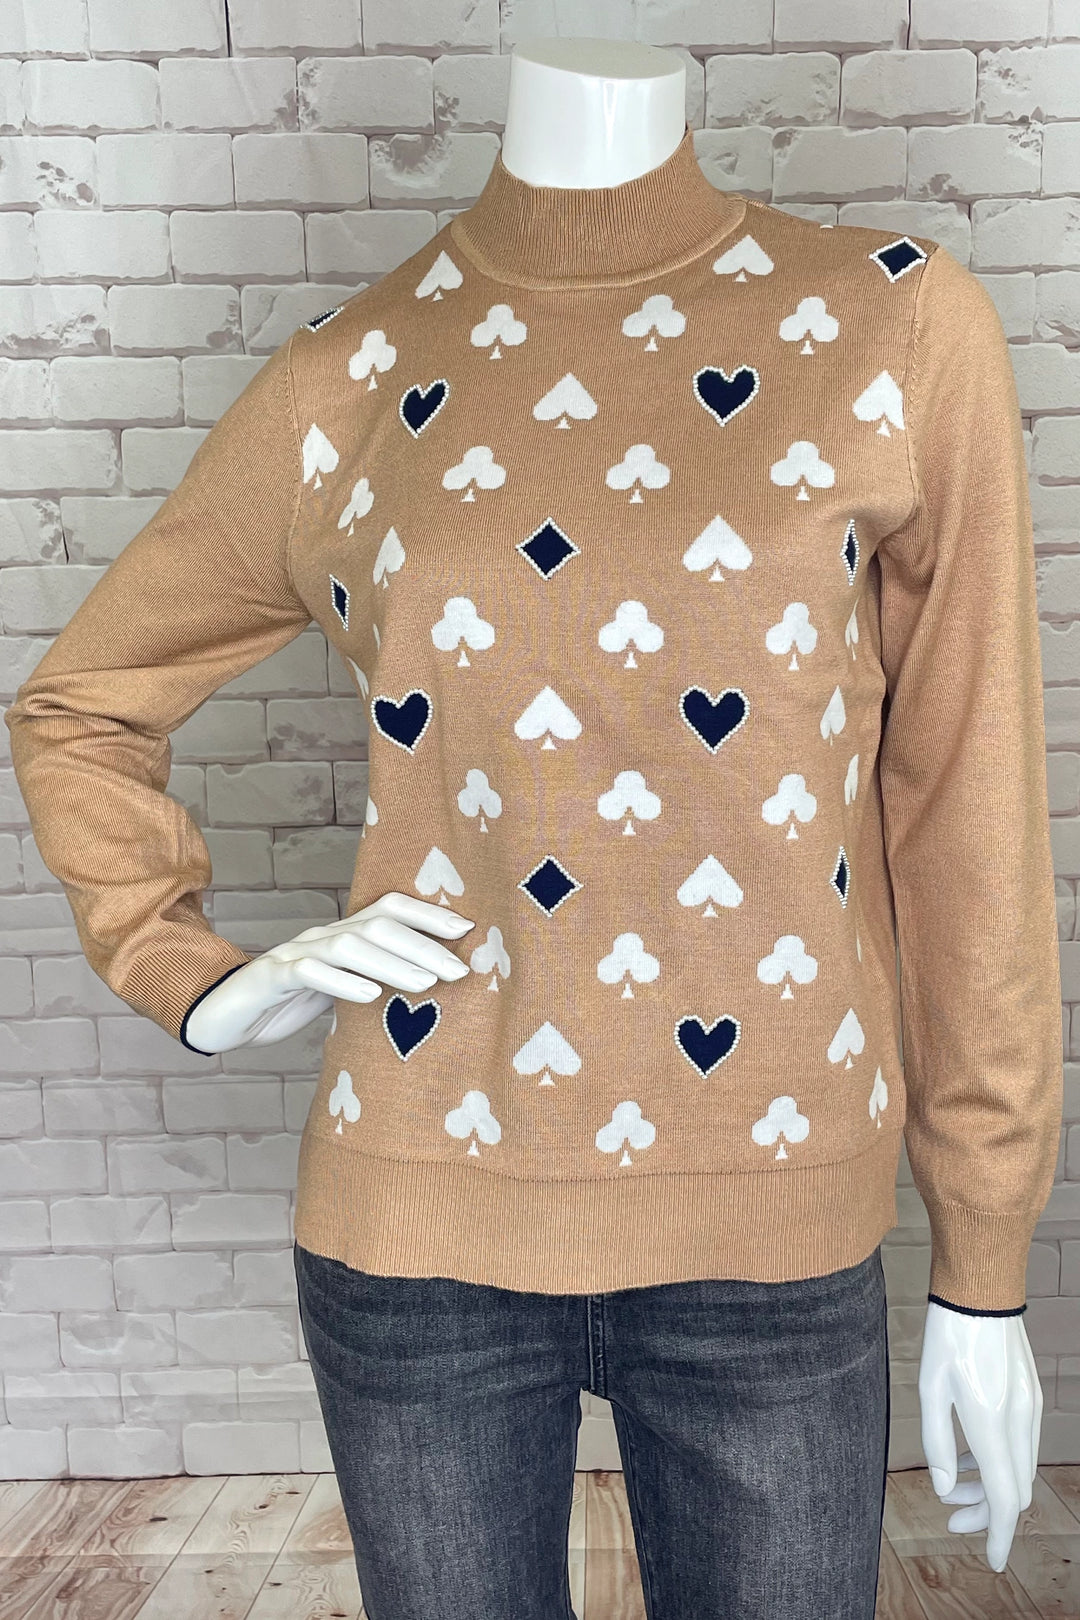 This mock neck long sleeve style features a bright and bold deck of card suits design, sure to let you stand out from the crowd! 